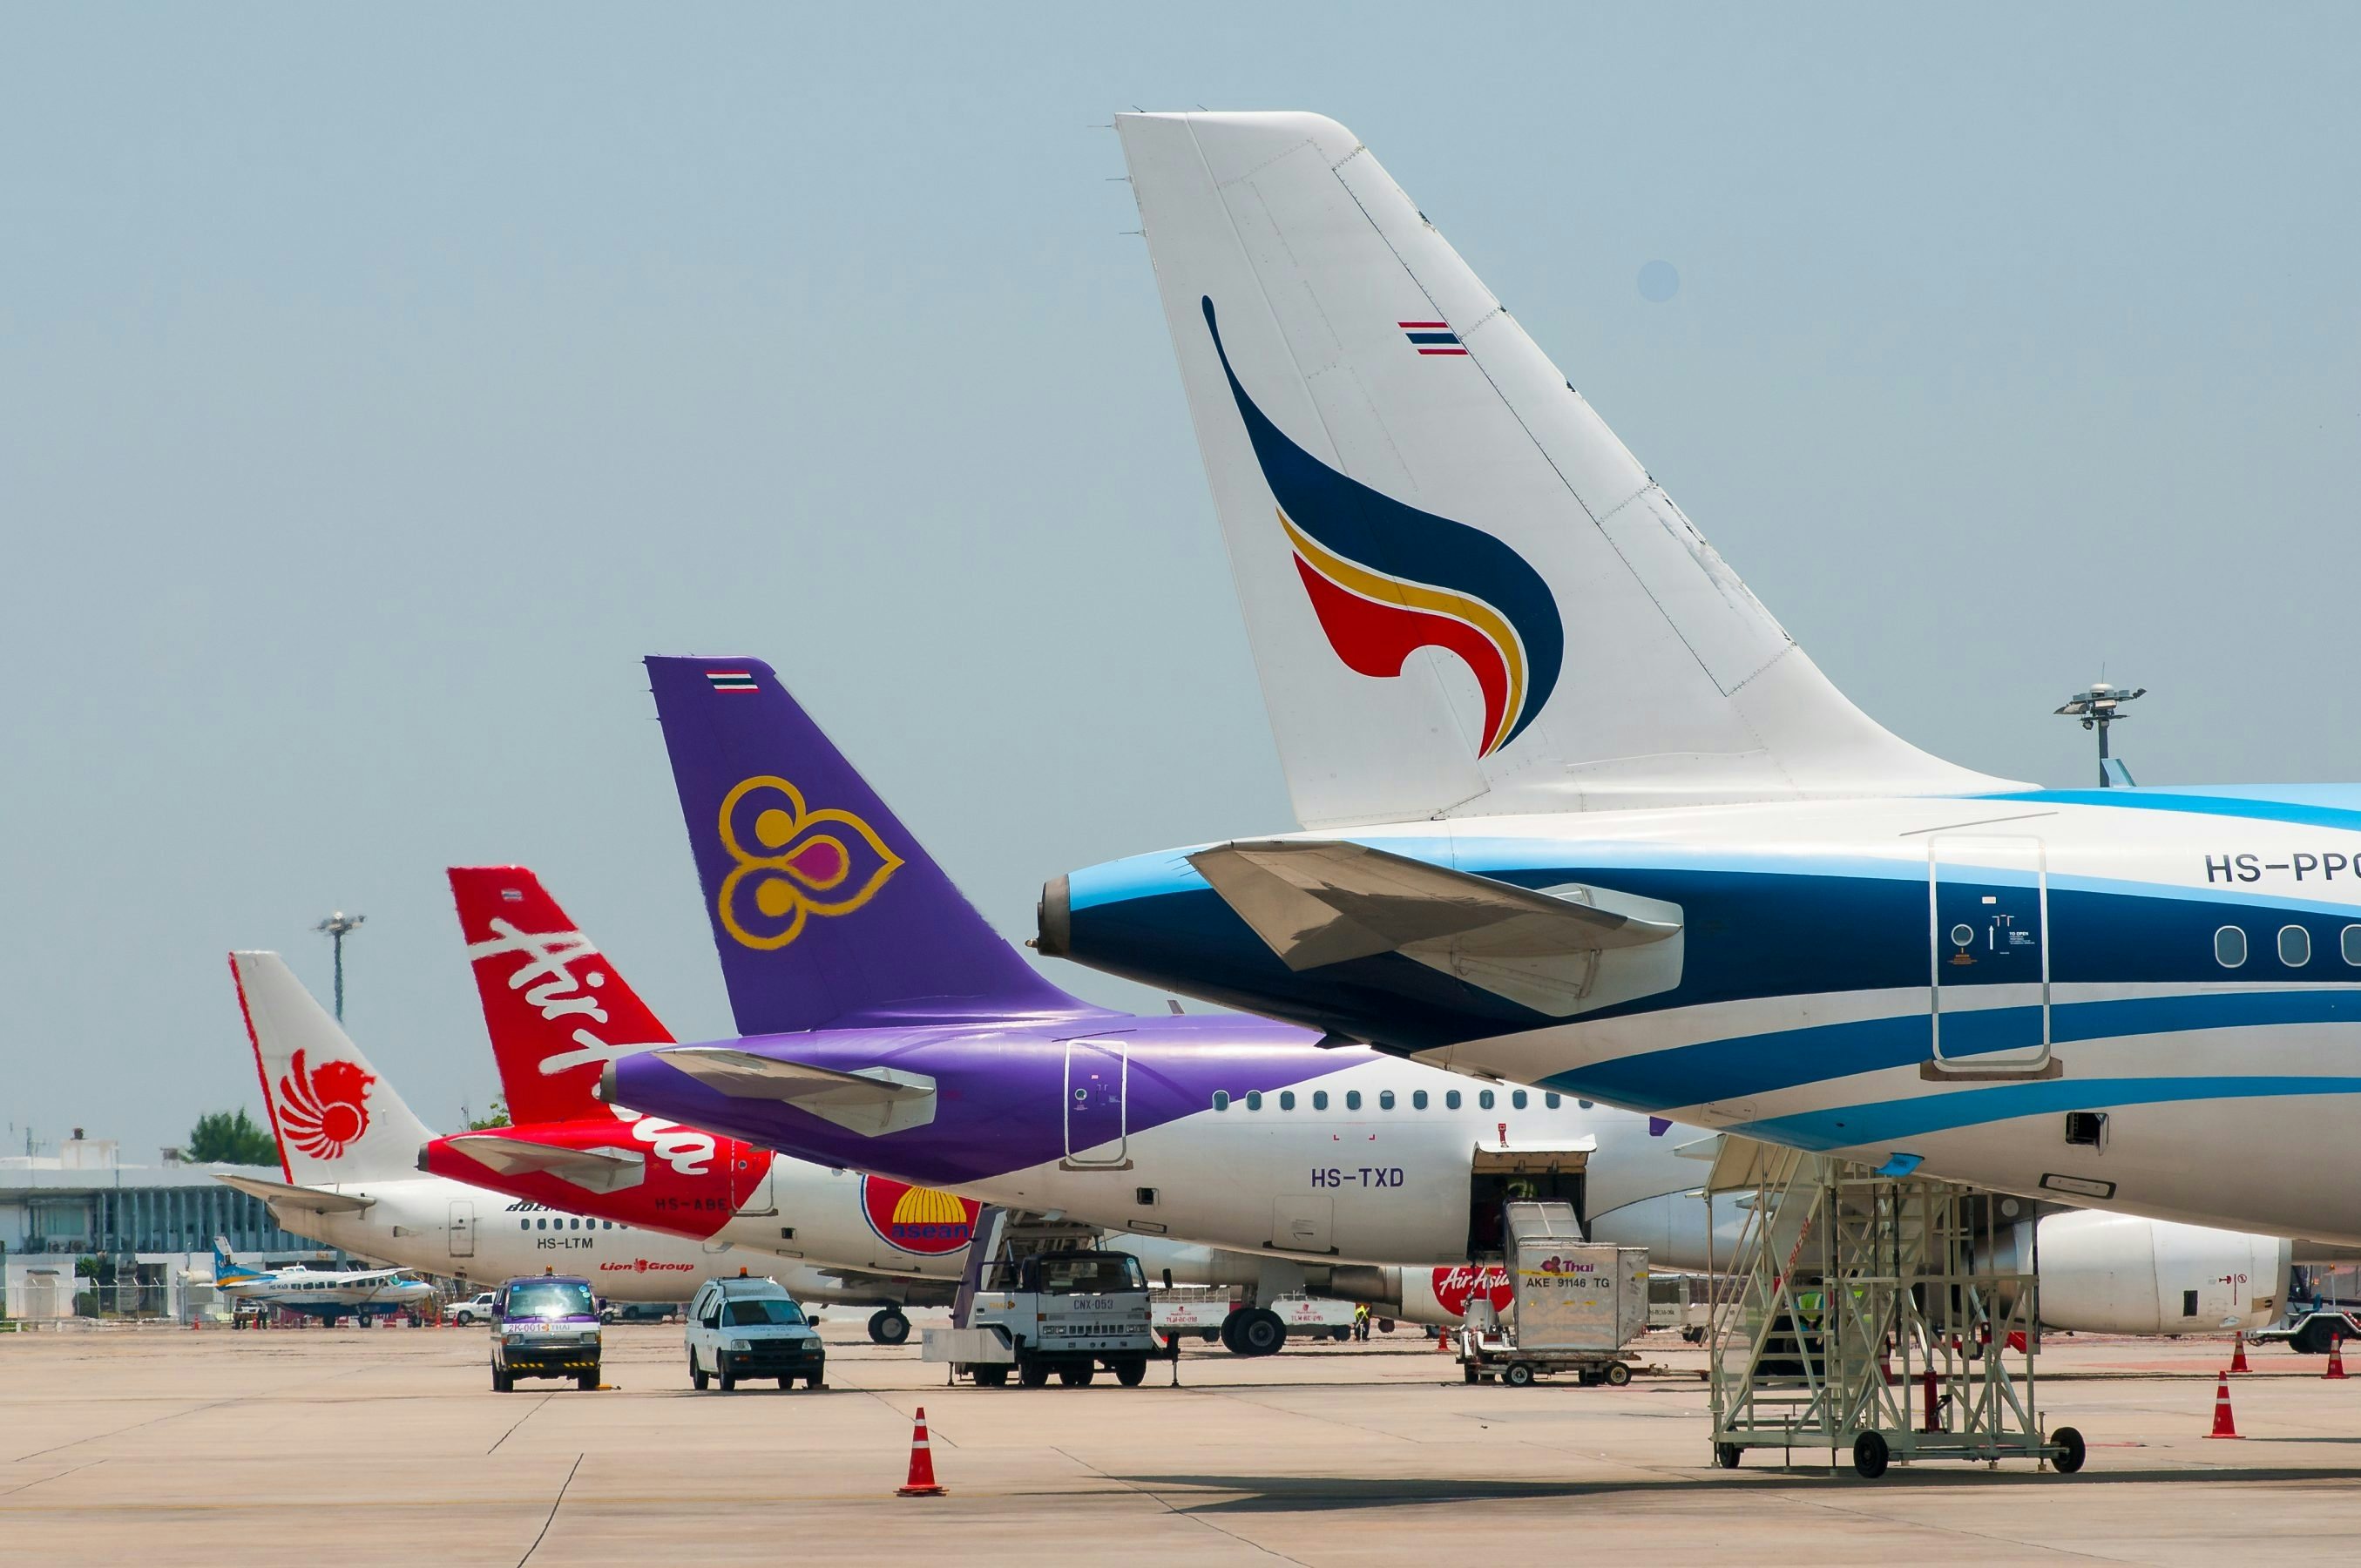 Thailand's recent tourism woes have caused some of its airlines to face financial distress. (Markus Schmal / Shutterstock.com)